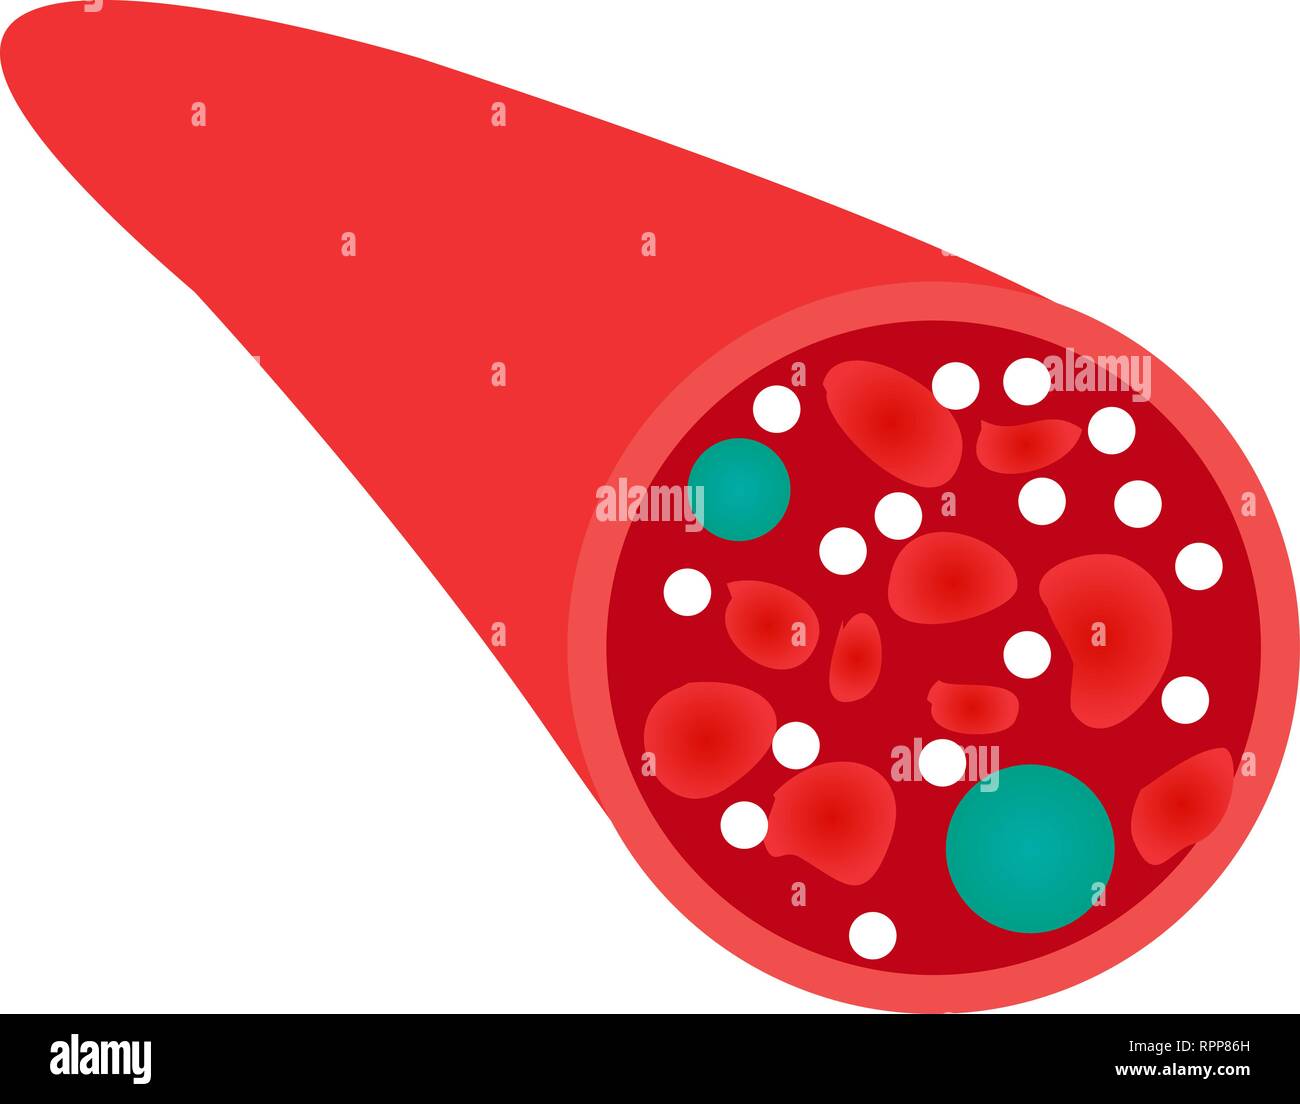 Sugar spikes in blood artery vector illustration on a white background Stock Vector